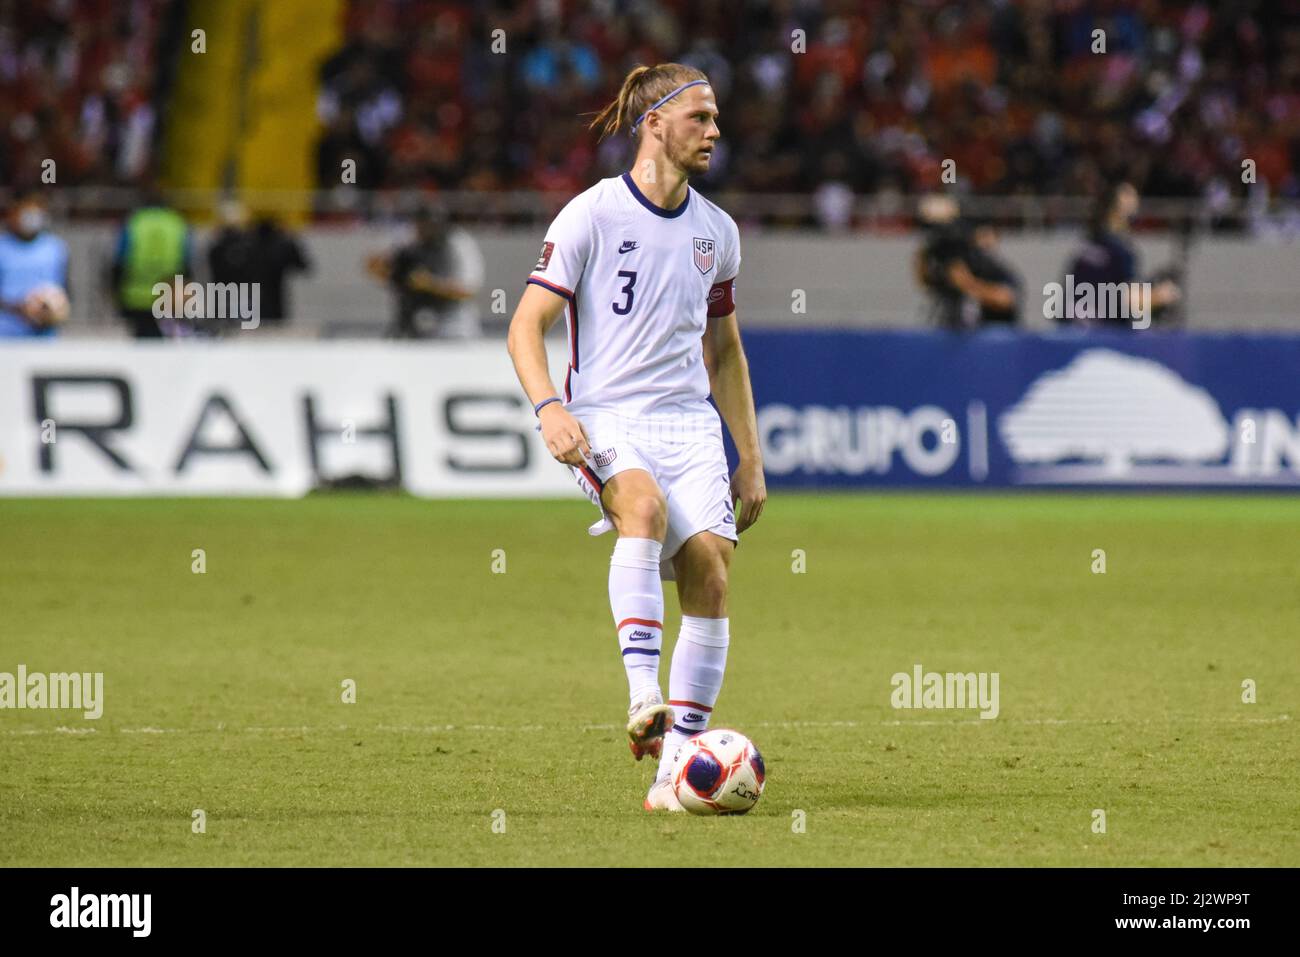 SAN JOSE, Costa Rica: USA player Walker Zimmerman (3) in action during the 2-0 Costa Rica victory over USA in the Concacaf FIFA World Cup Qualifiers o Stock Photo